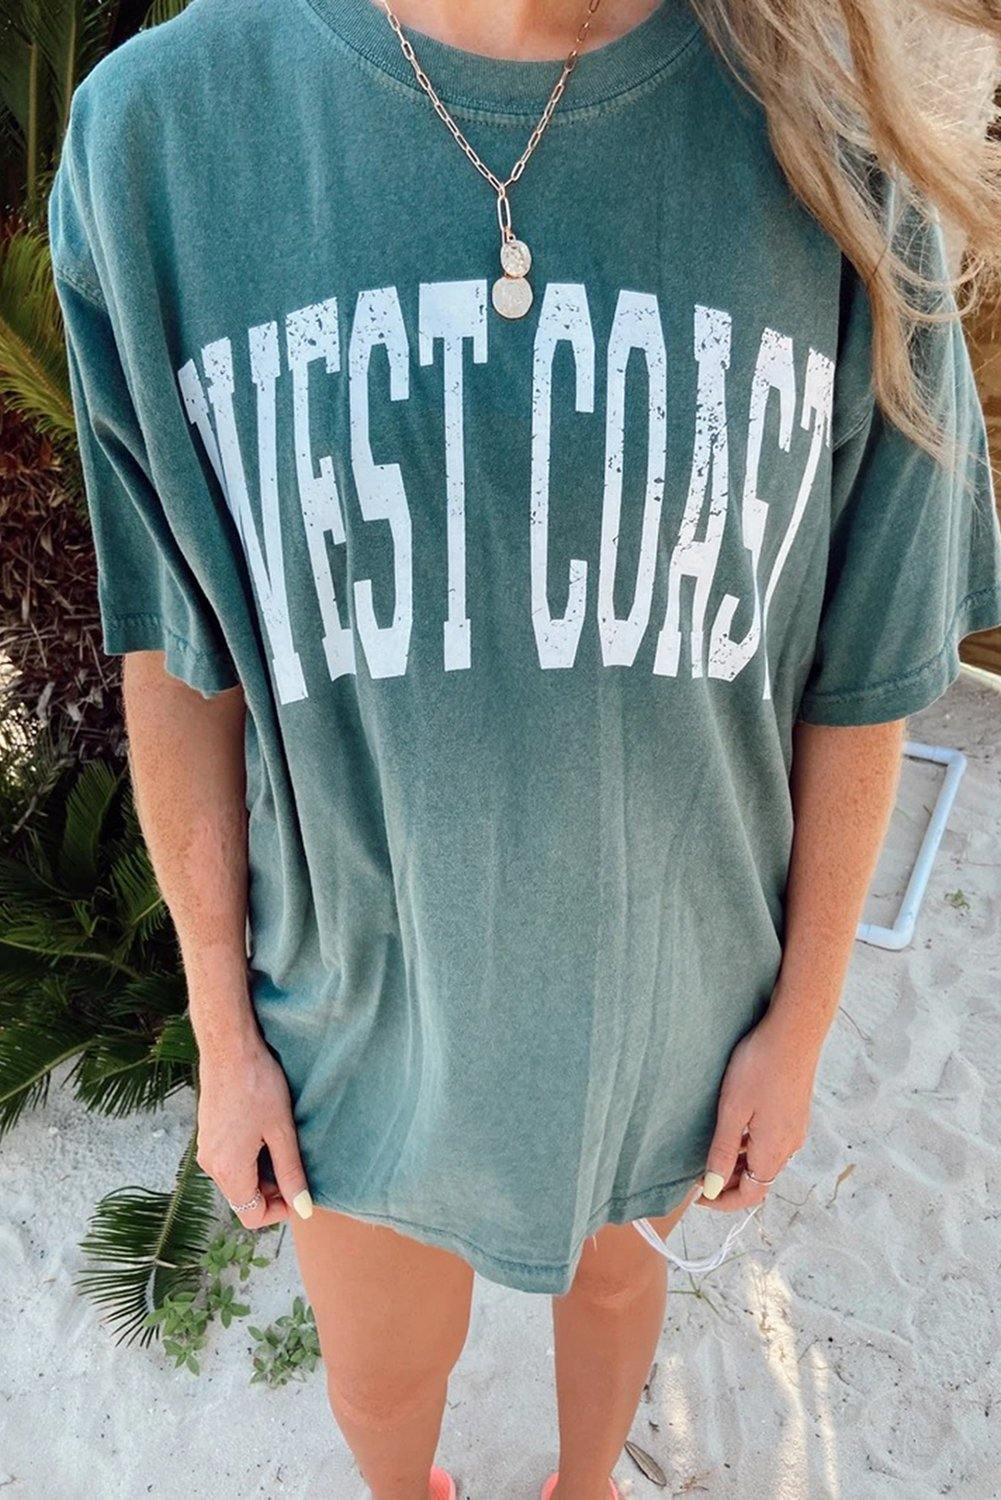 WEST COAST Letters Graphic Oversize Tee - L & M Kee, LLC